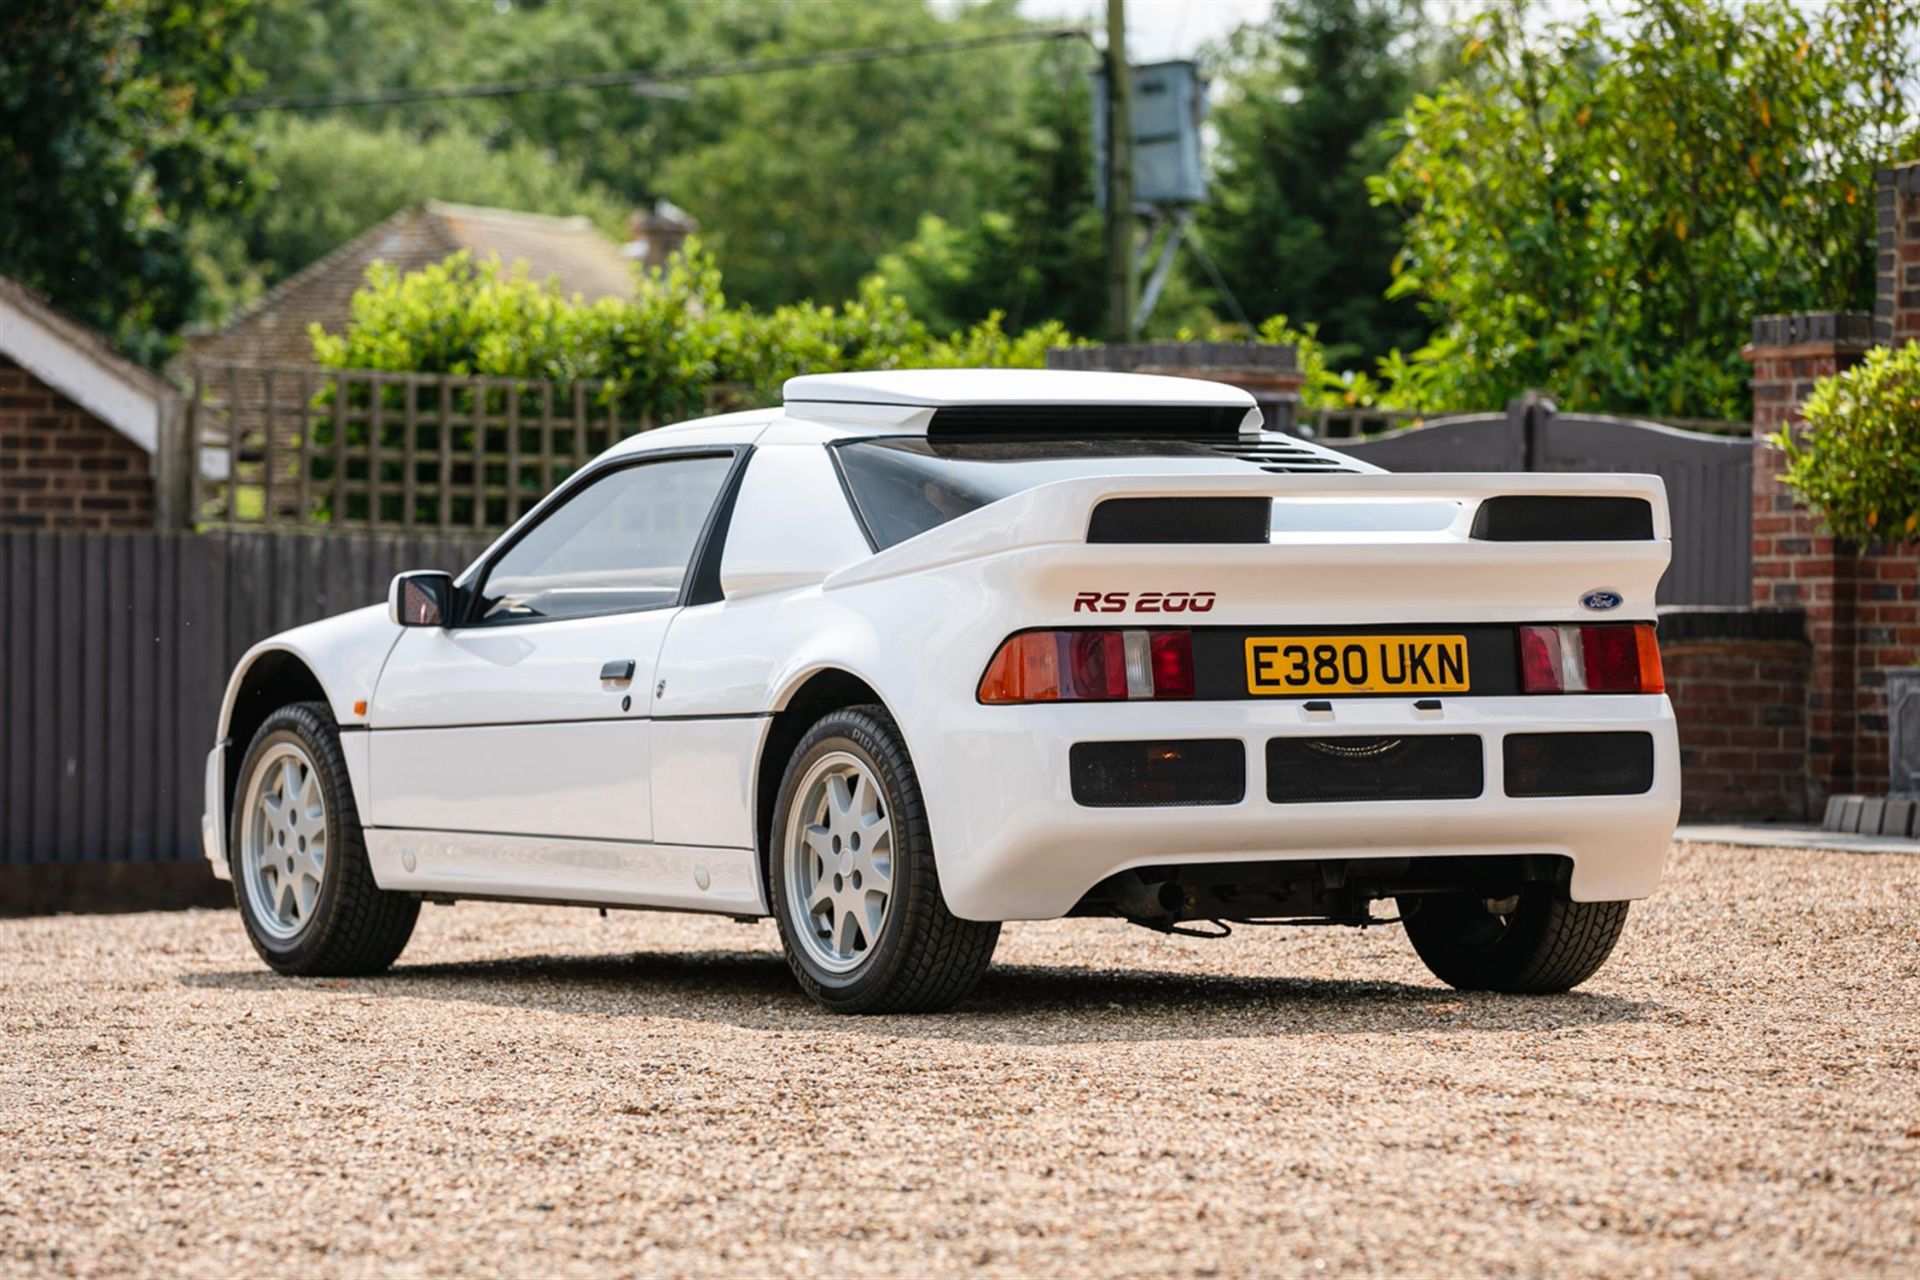 1987 Ford RS200 Tickford #112 - Image 4 of 10